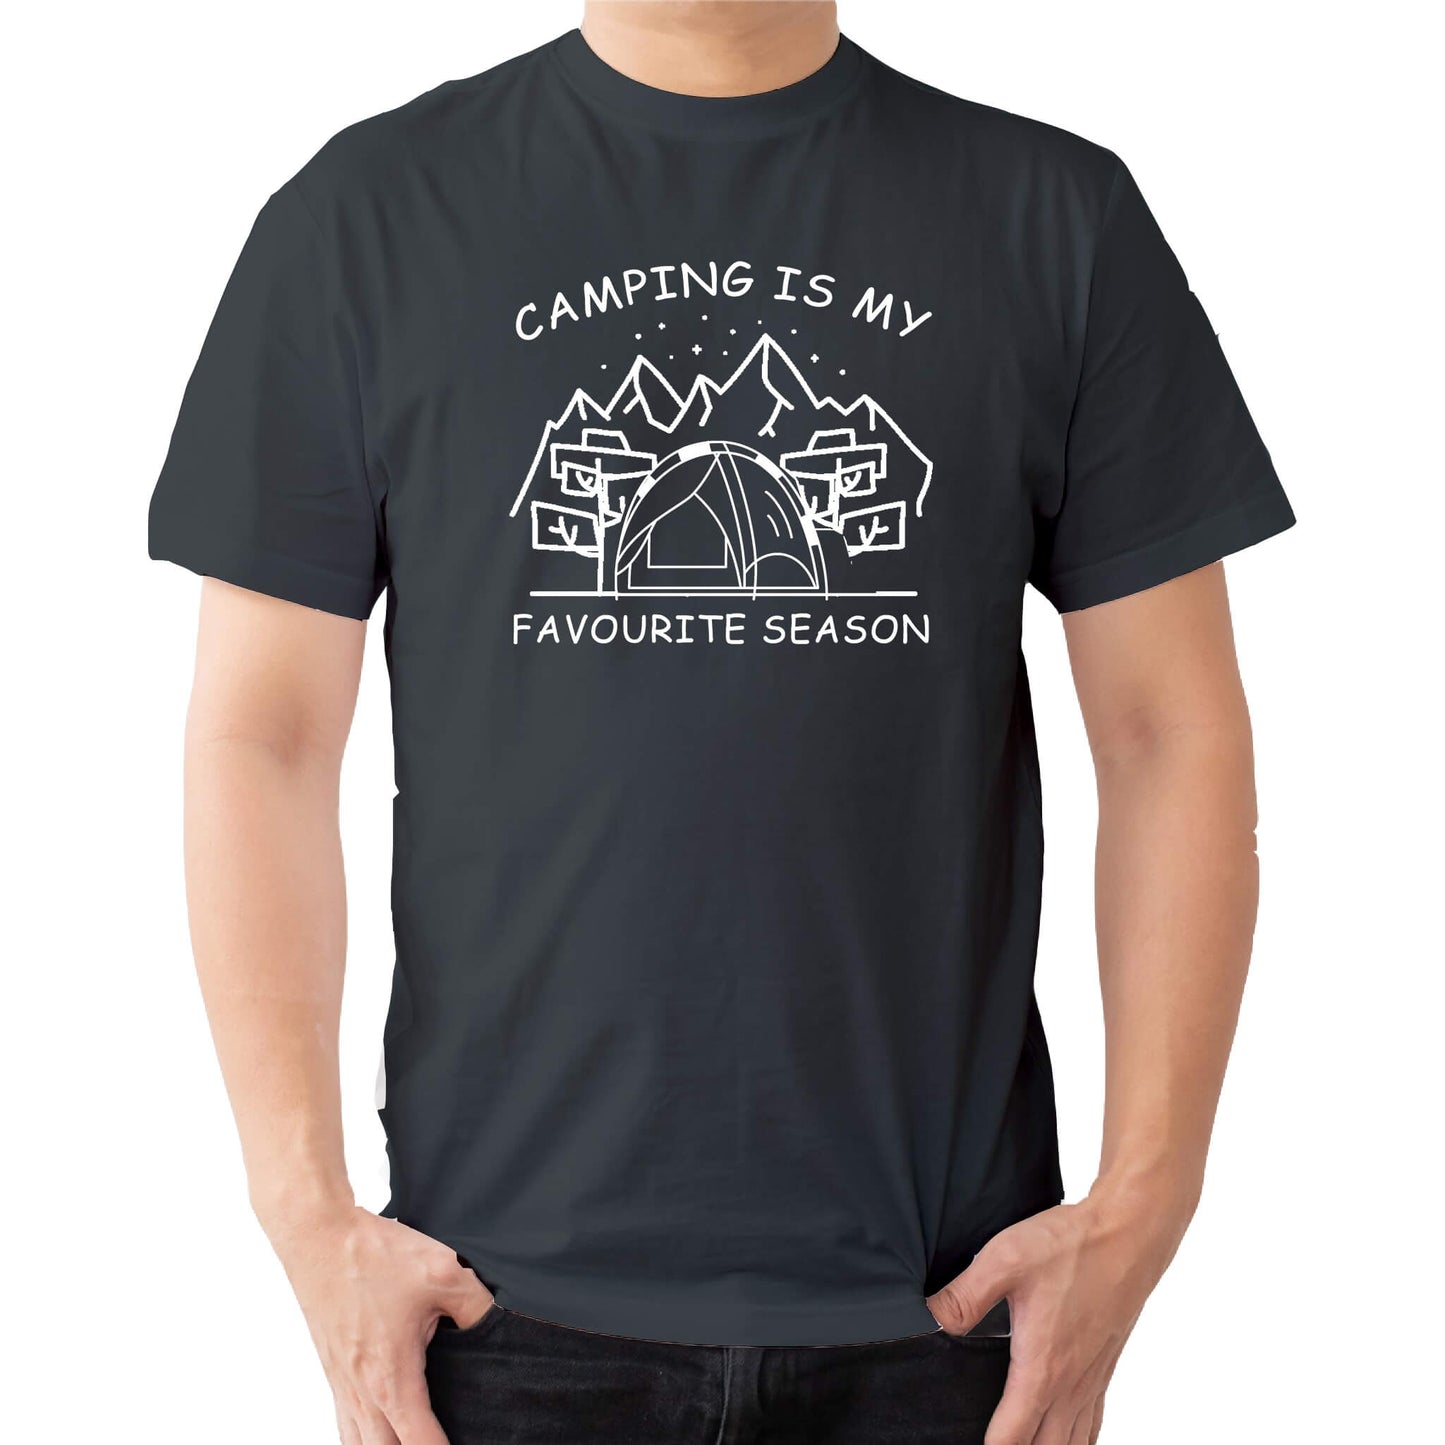  "Grey Graphic tee with an illustration of a tent, surrounded by nature. Text reads: 'Camping is my favorite season.' Celebrate the great outdoors!"